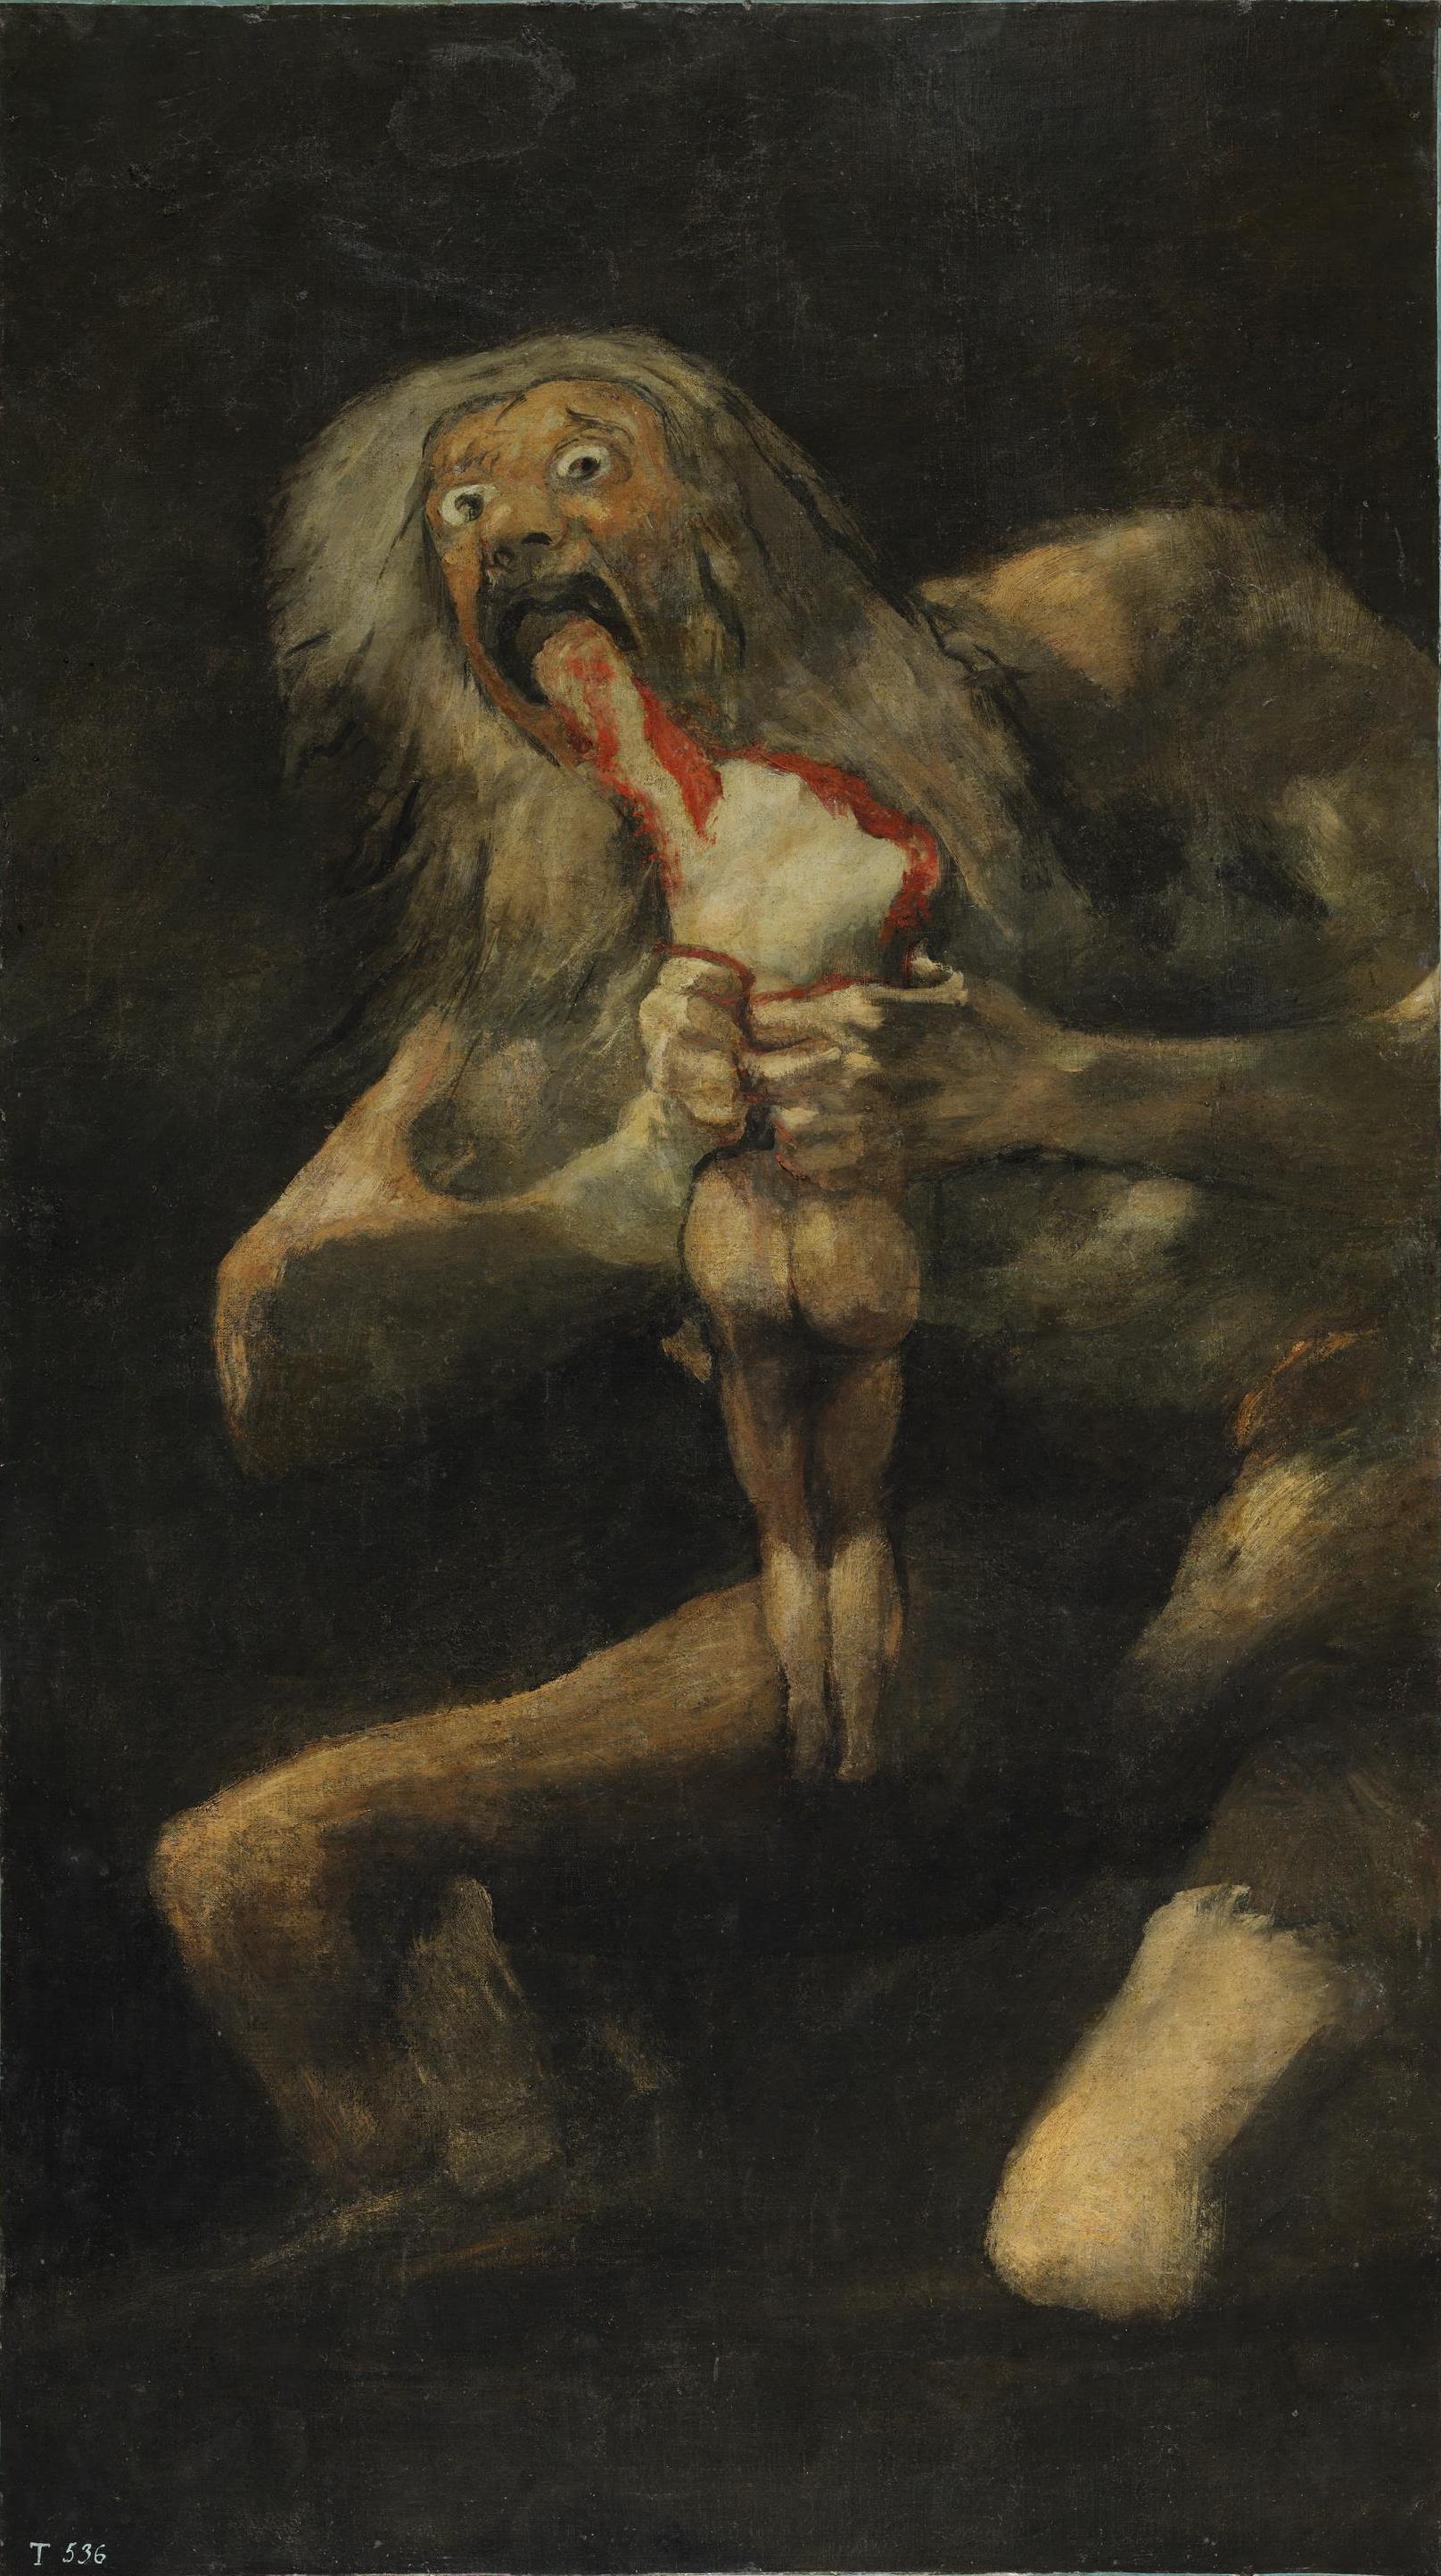 Essay based on the paintings of Francisco Goya Saturn devouring his son, Fight with clubs, Dog. Author: Murad Ibragimov - My, Francisco Goya, , Saturn Devouring His Son, Longpost